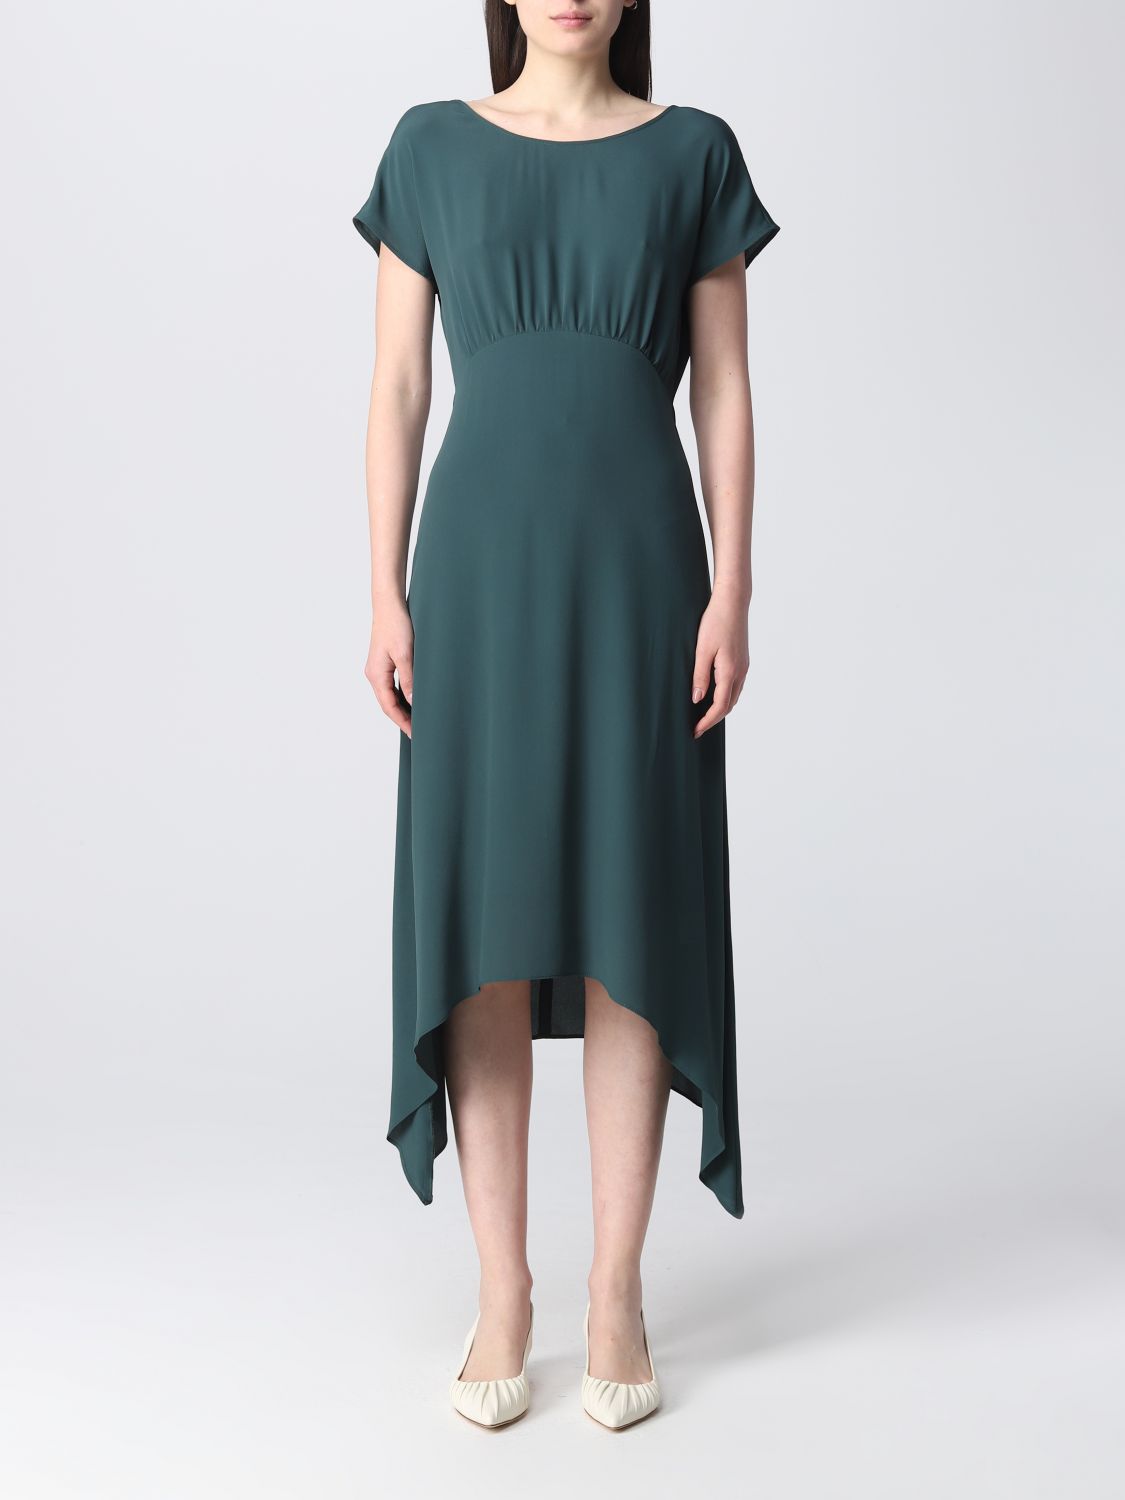 GRIFONI: dress for woman - Green | Grifoni dress GO2701397 online on ...